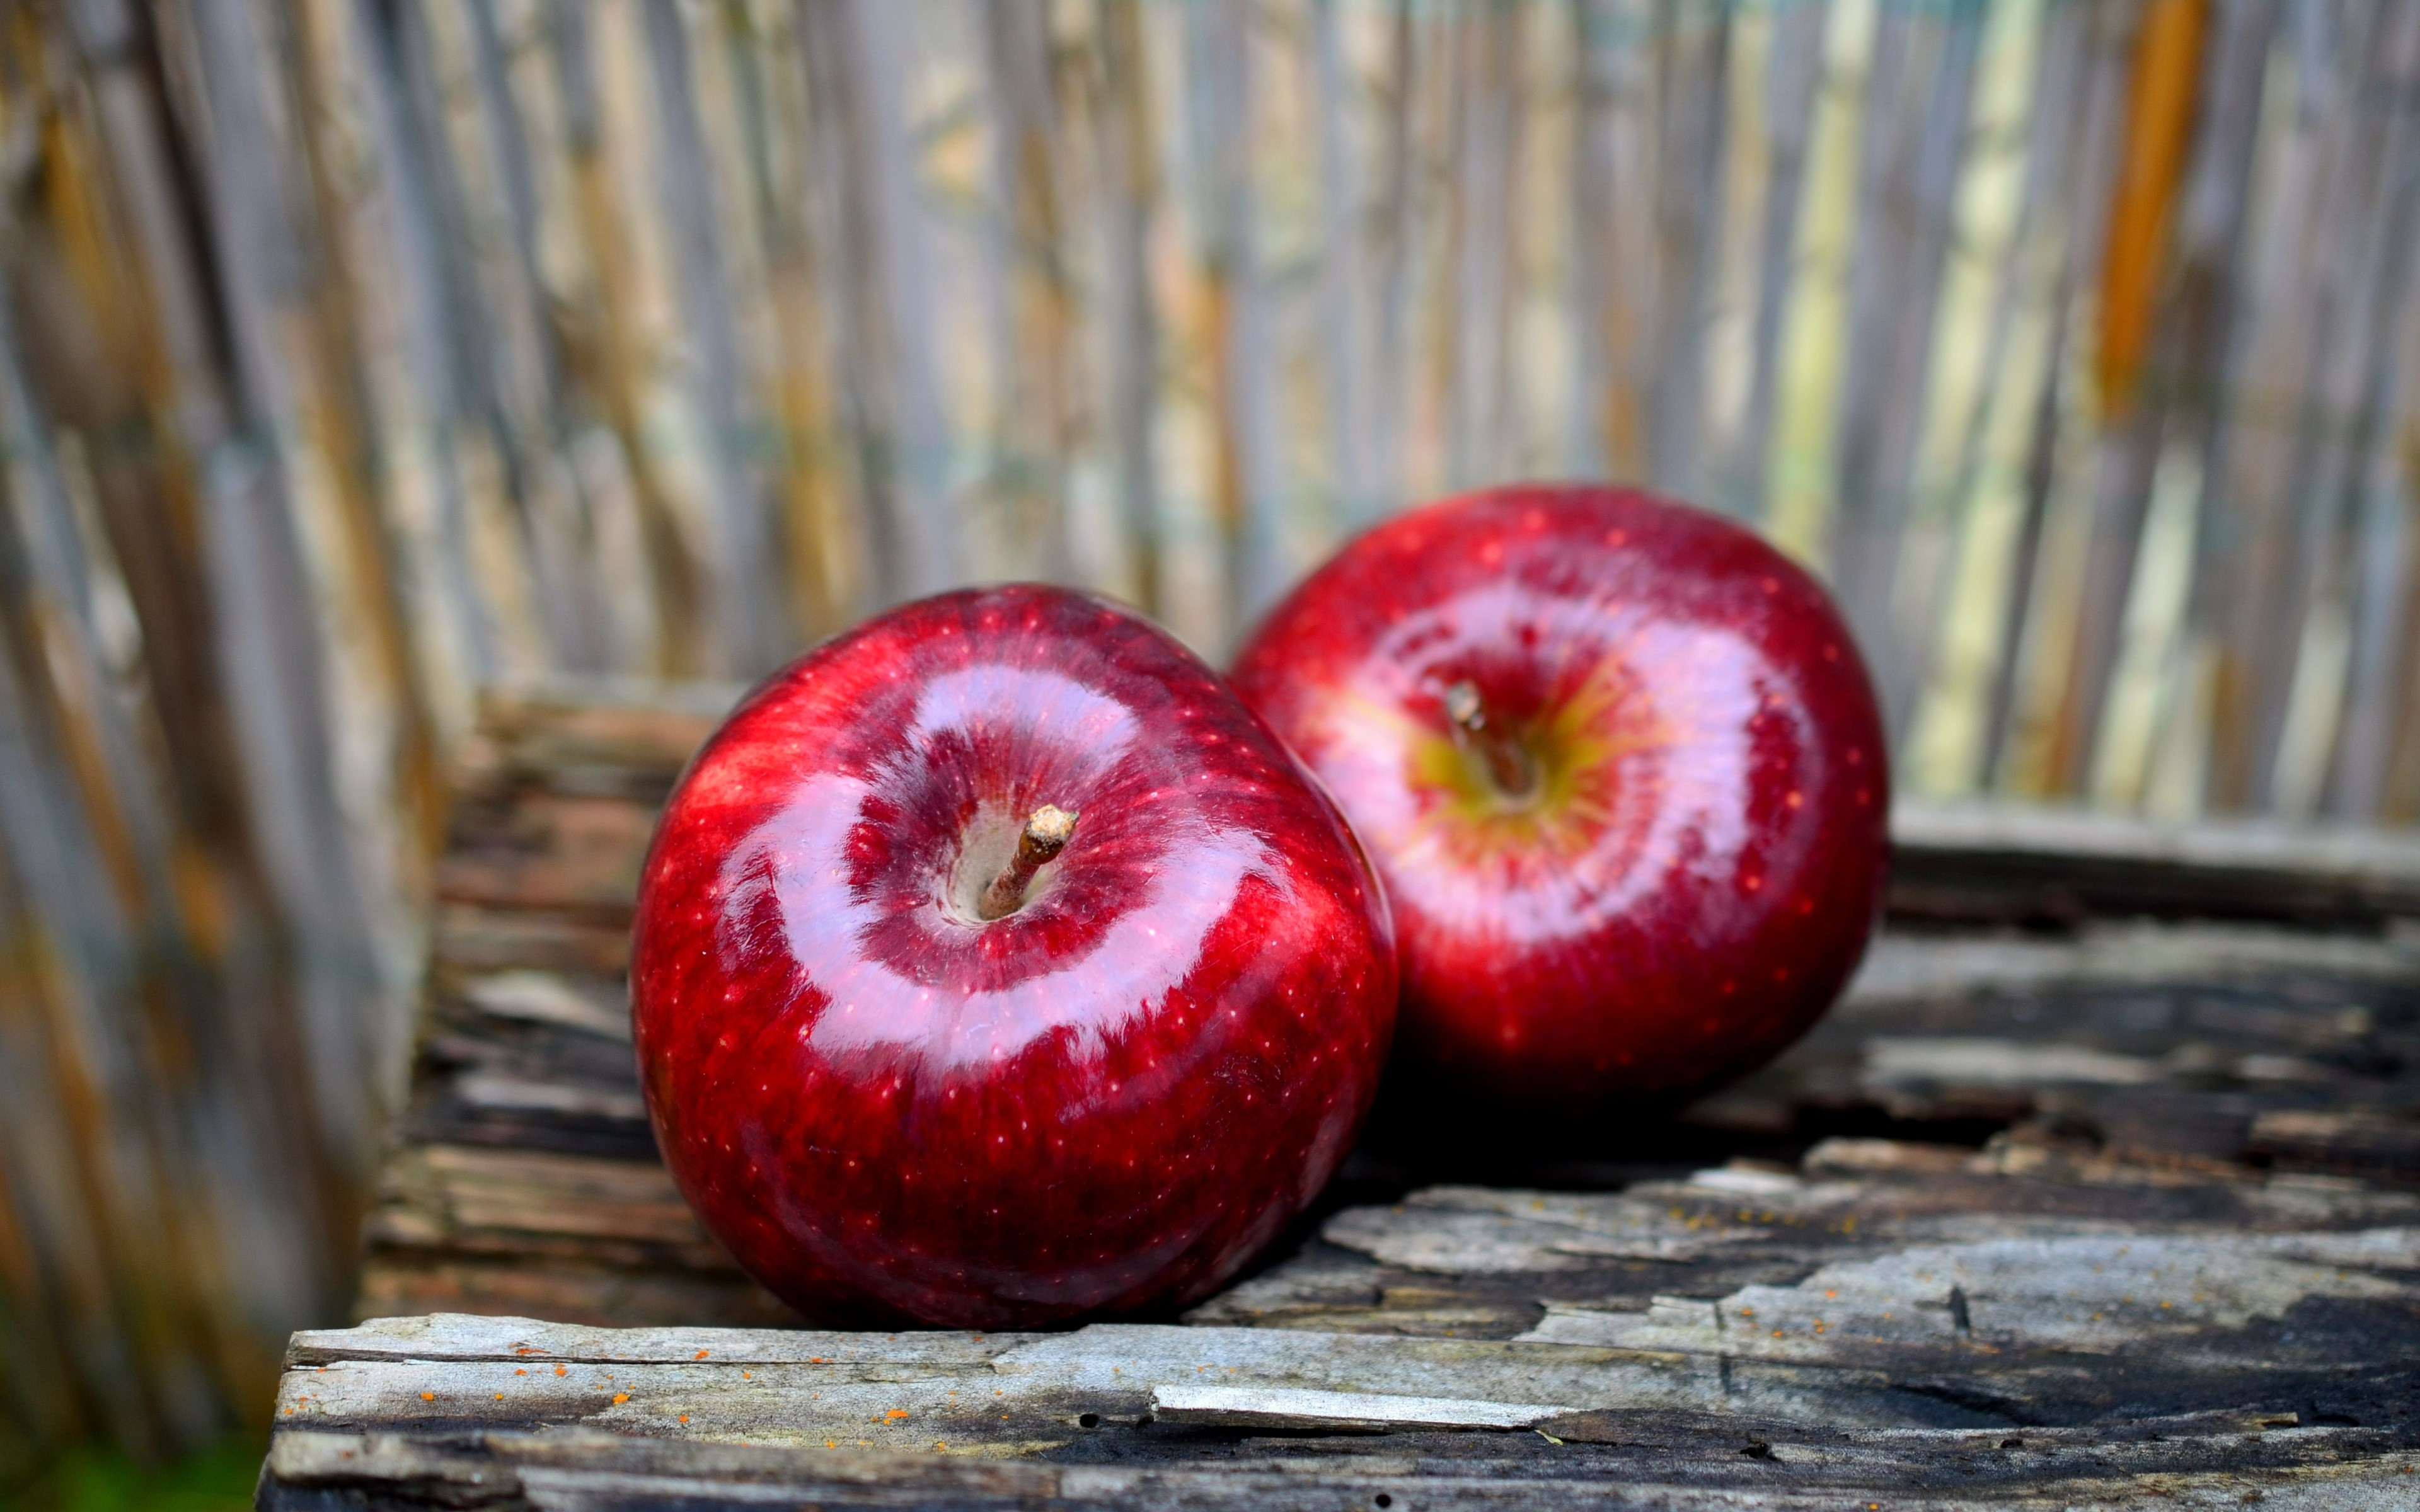 Delicious red apples wallpaper 3840x2400